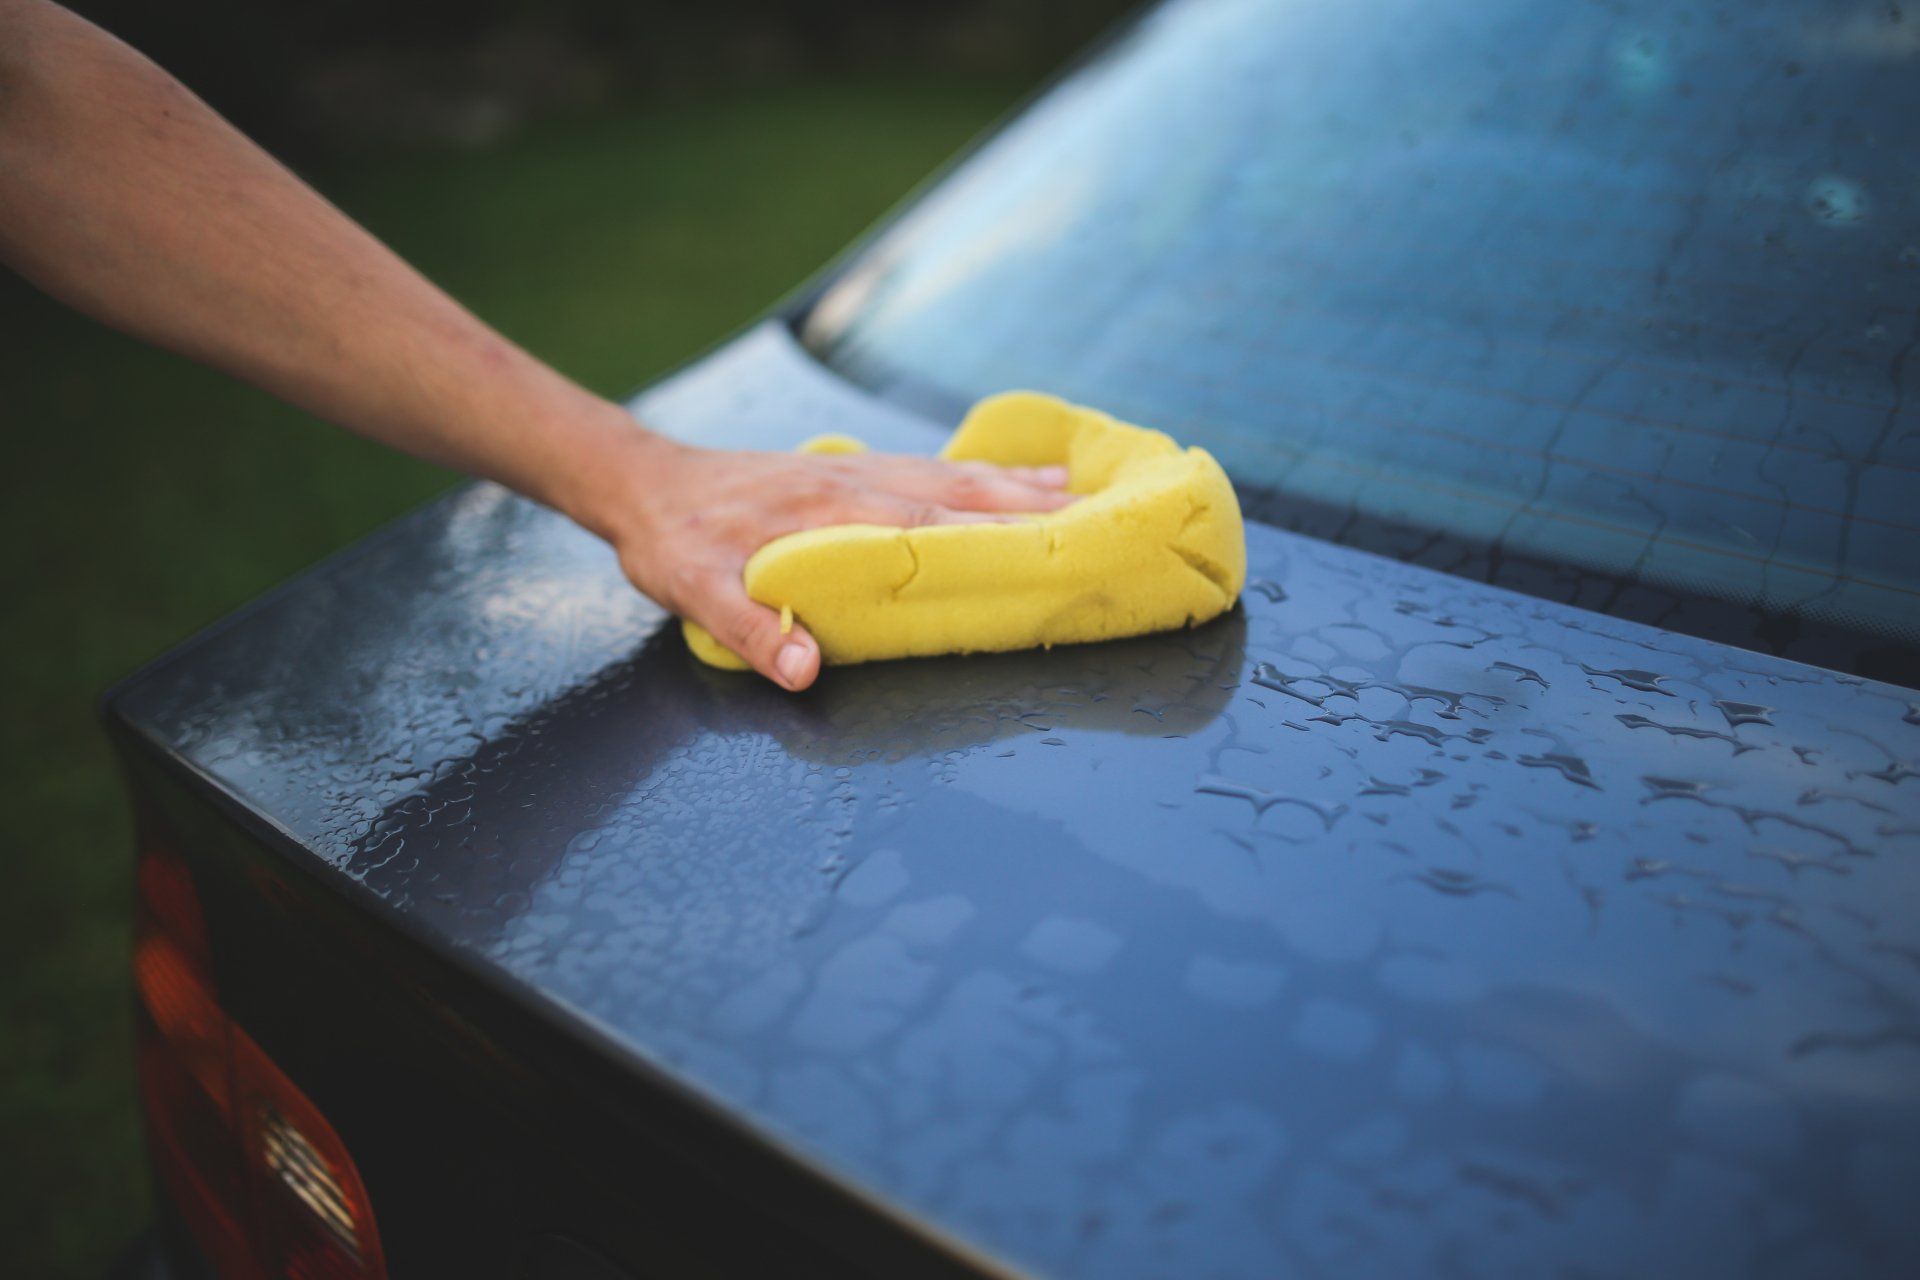 wiping a car's exterior using cloth